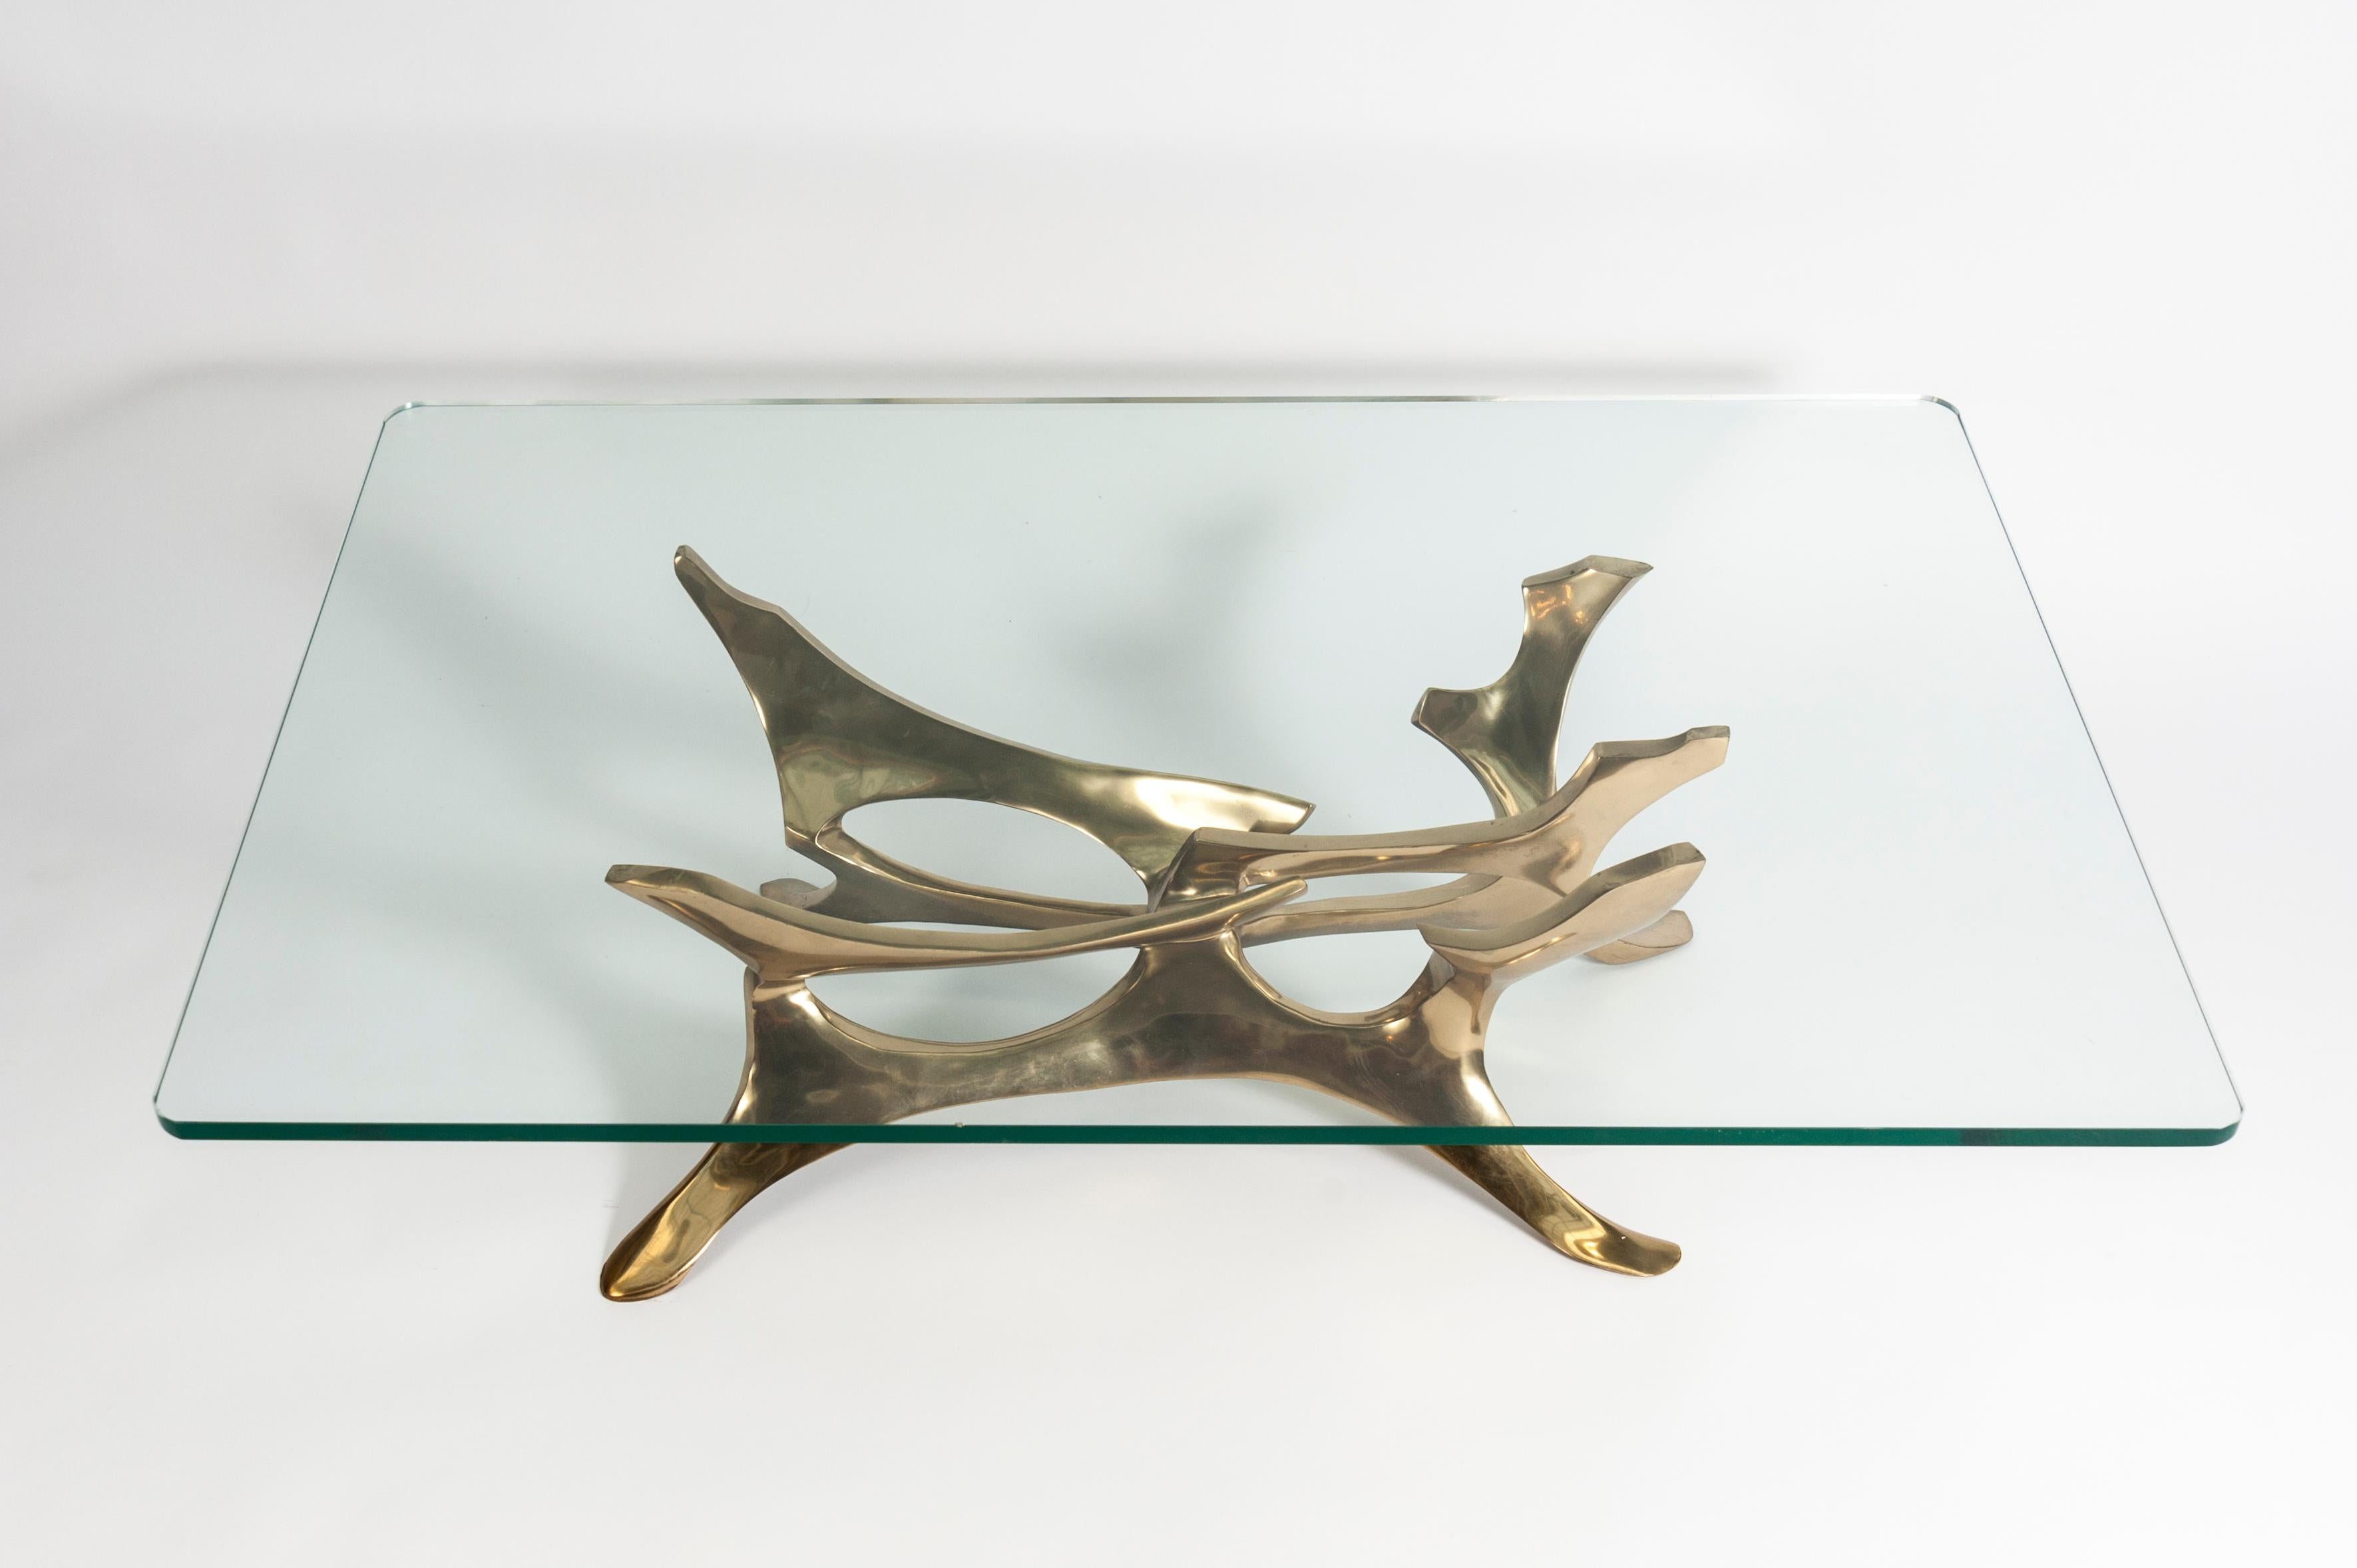 Brutalist bronze cocktail table signed and numbered 2/8.